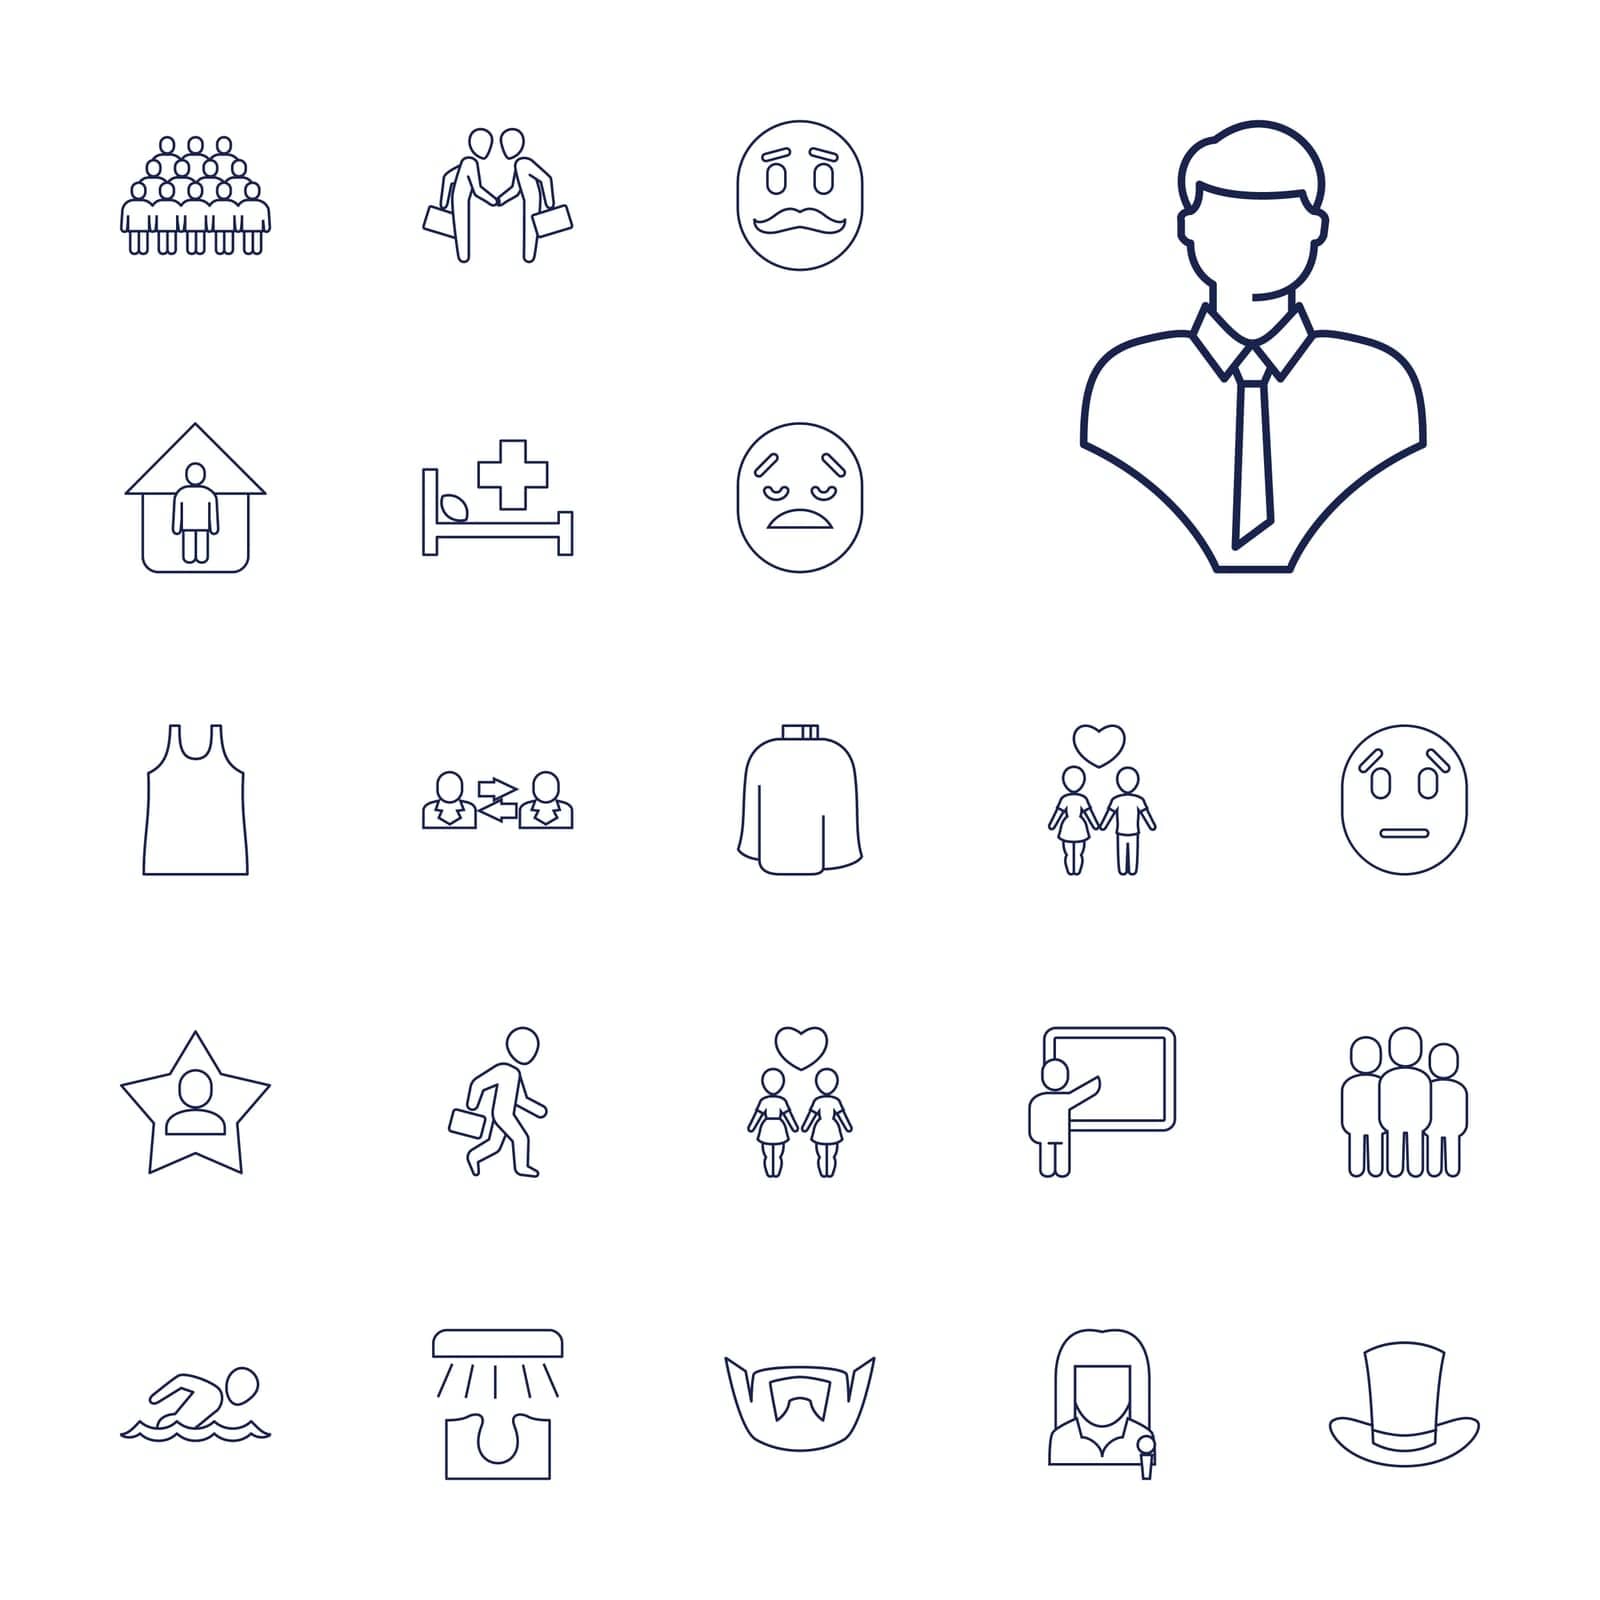 bed,couple,medical,woman,hands,icon,mustache,swimming,hair,hairdresser,teacher,crying,sad,peignoir,bust,vector,man,communication,businessman,case,group,emot,set,in,favourite,shaking,home,hairstyle,with,singlet,removal,user,women by ogqcorp